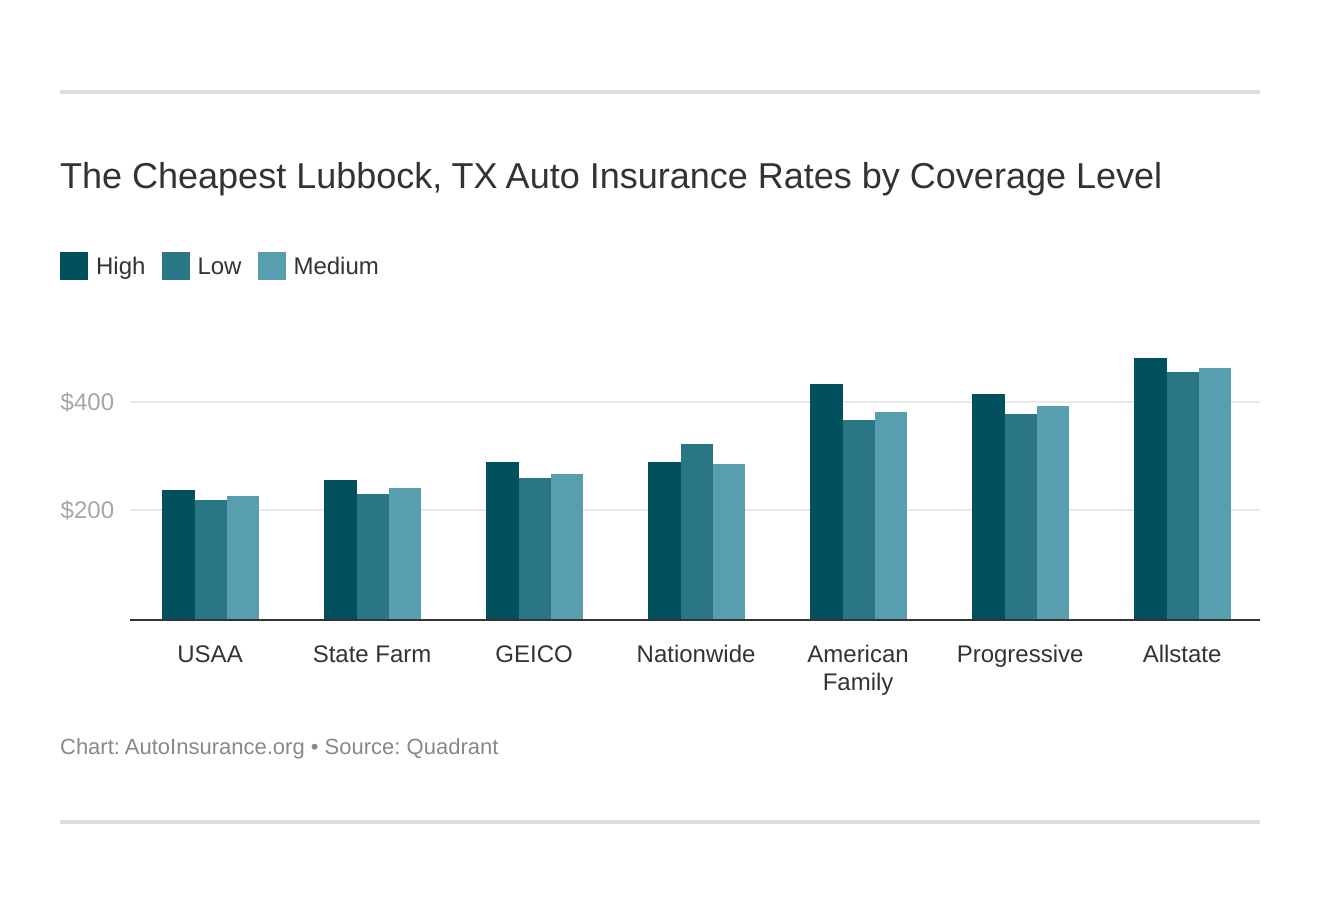 The Cheapest Lubbock, TX Auto Insurance Rates by Coverage Level